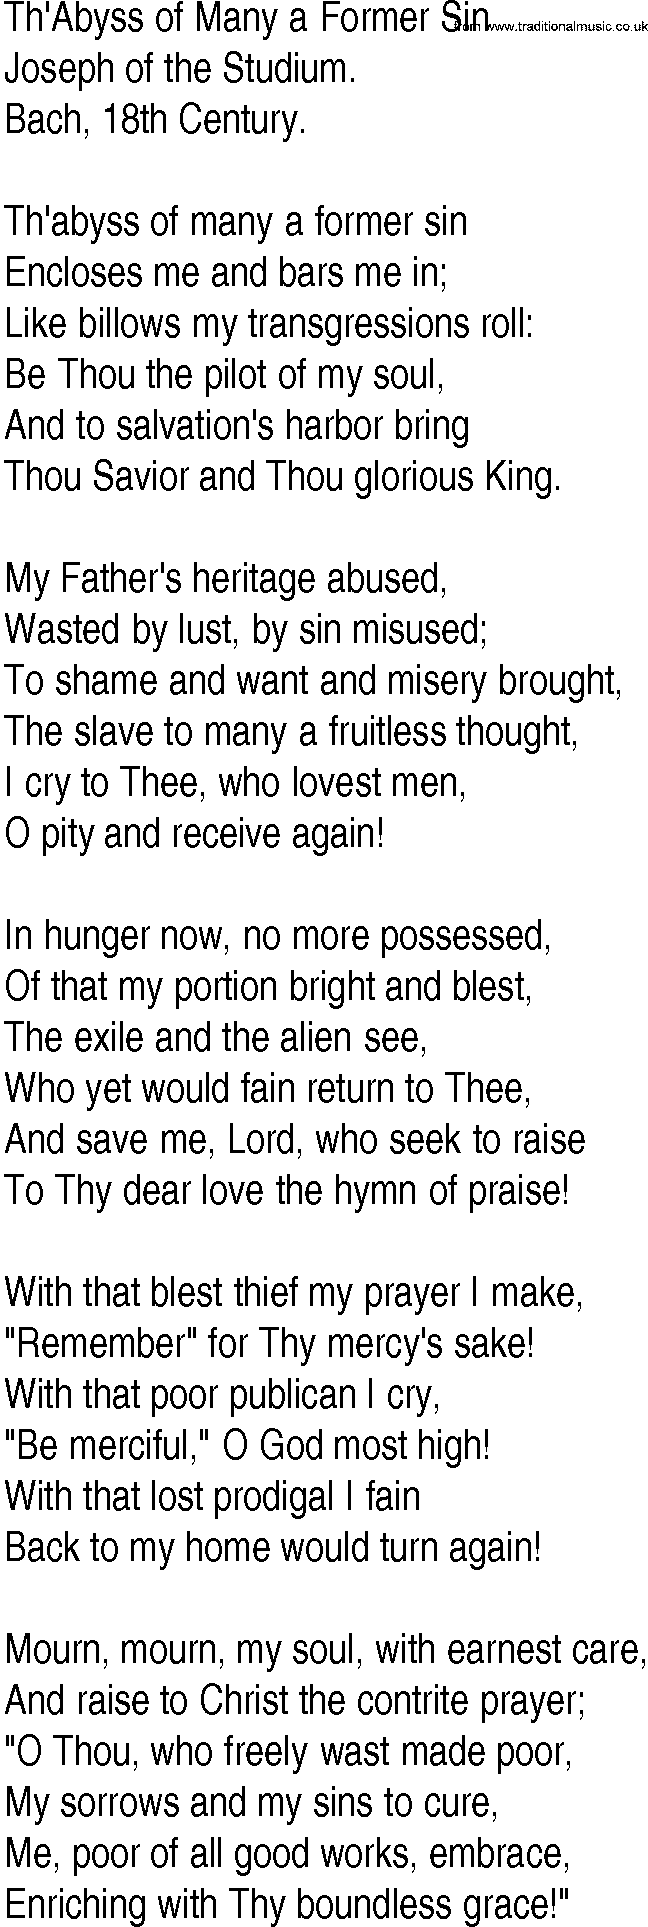 Hymn and Gospel Song: Th'Abyss of Many a Former Sin by Joseph of the Studium lyrics